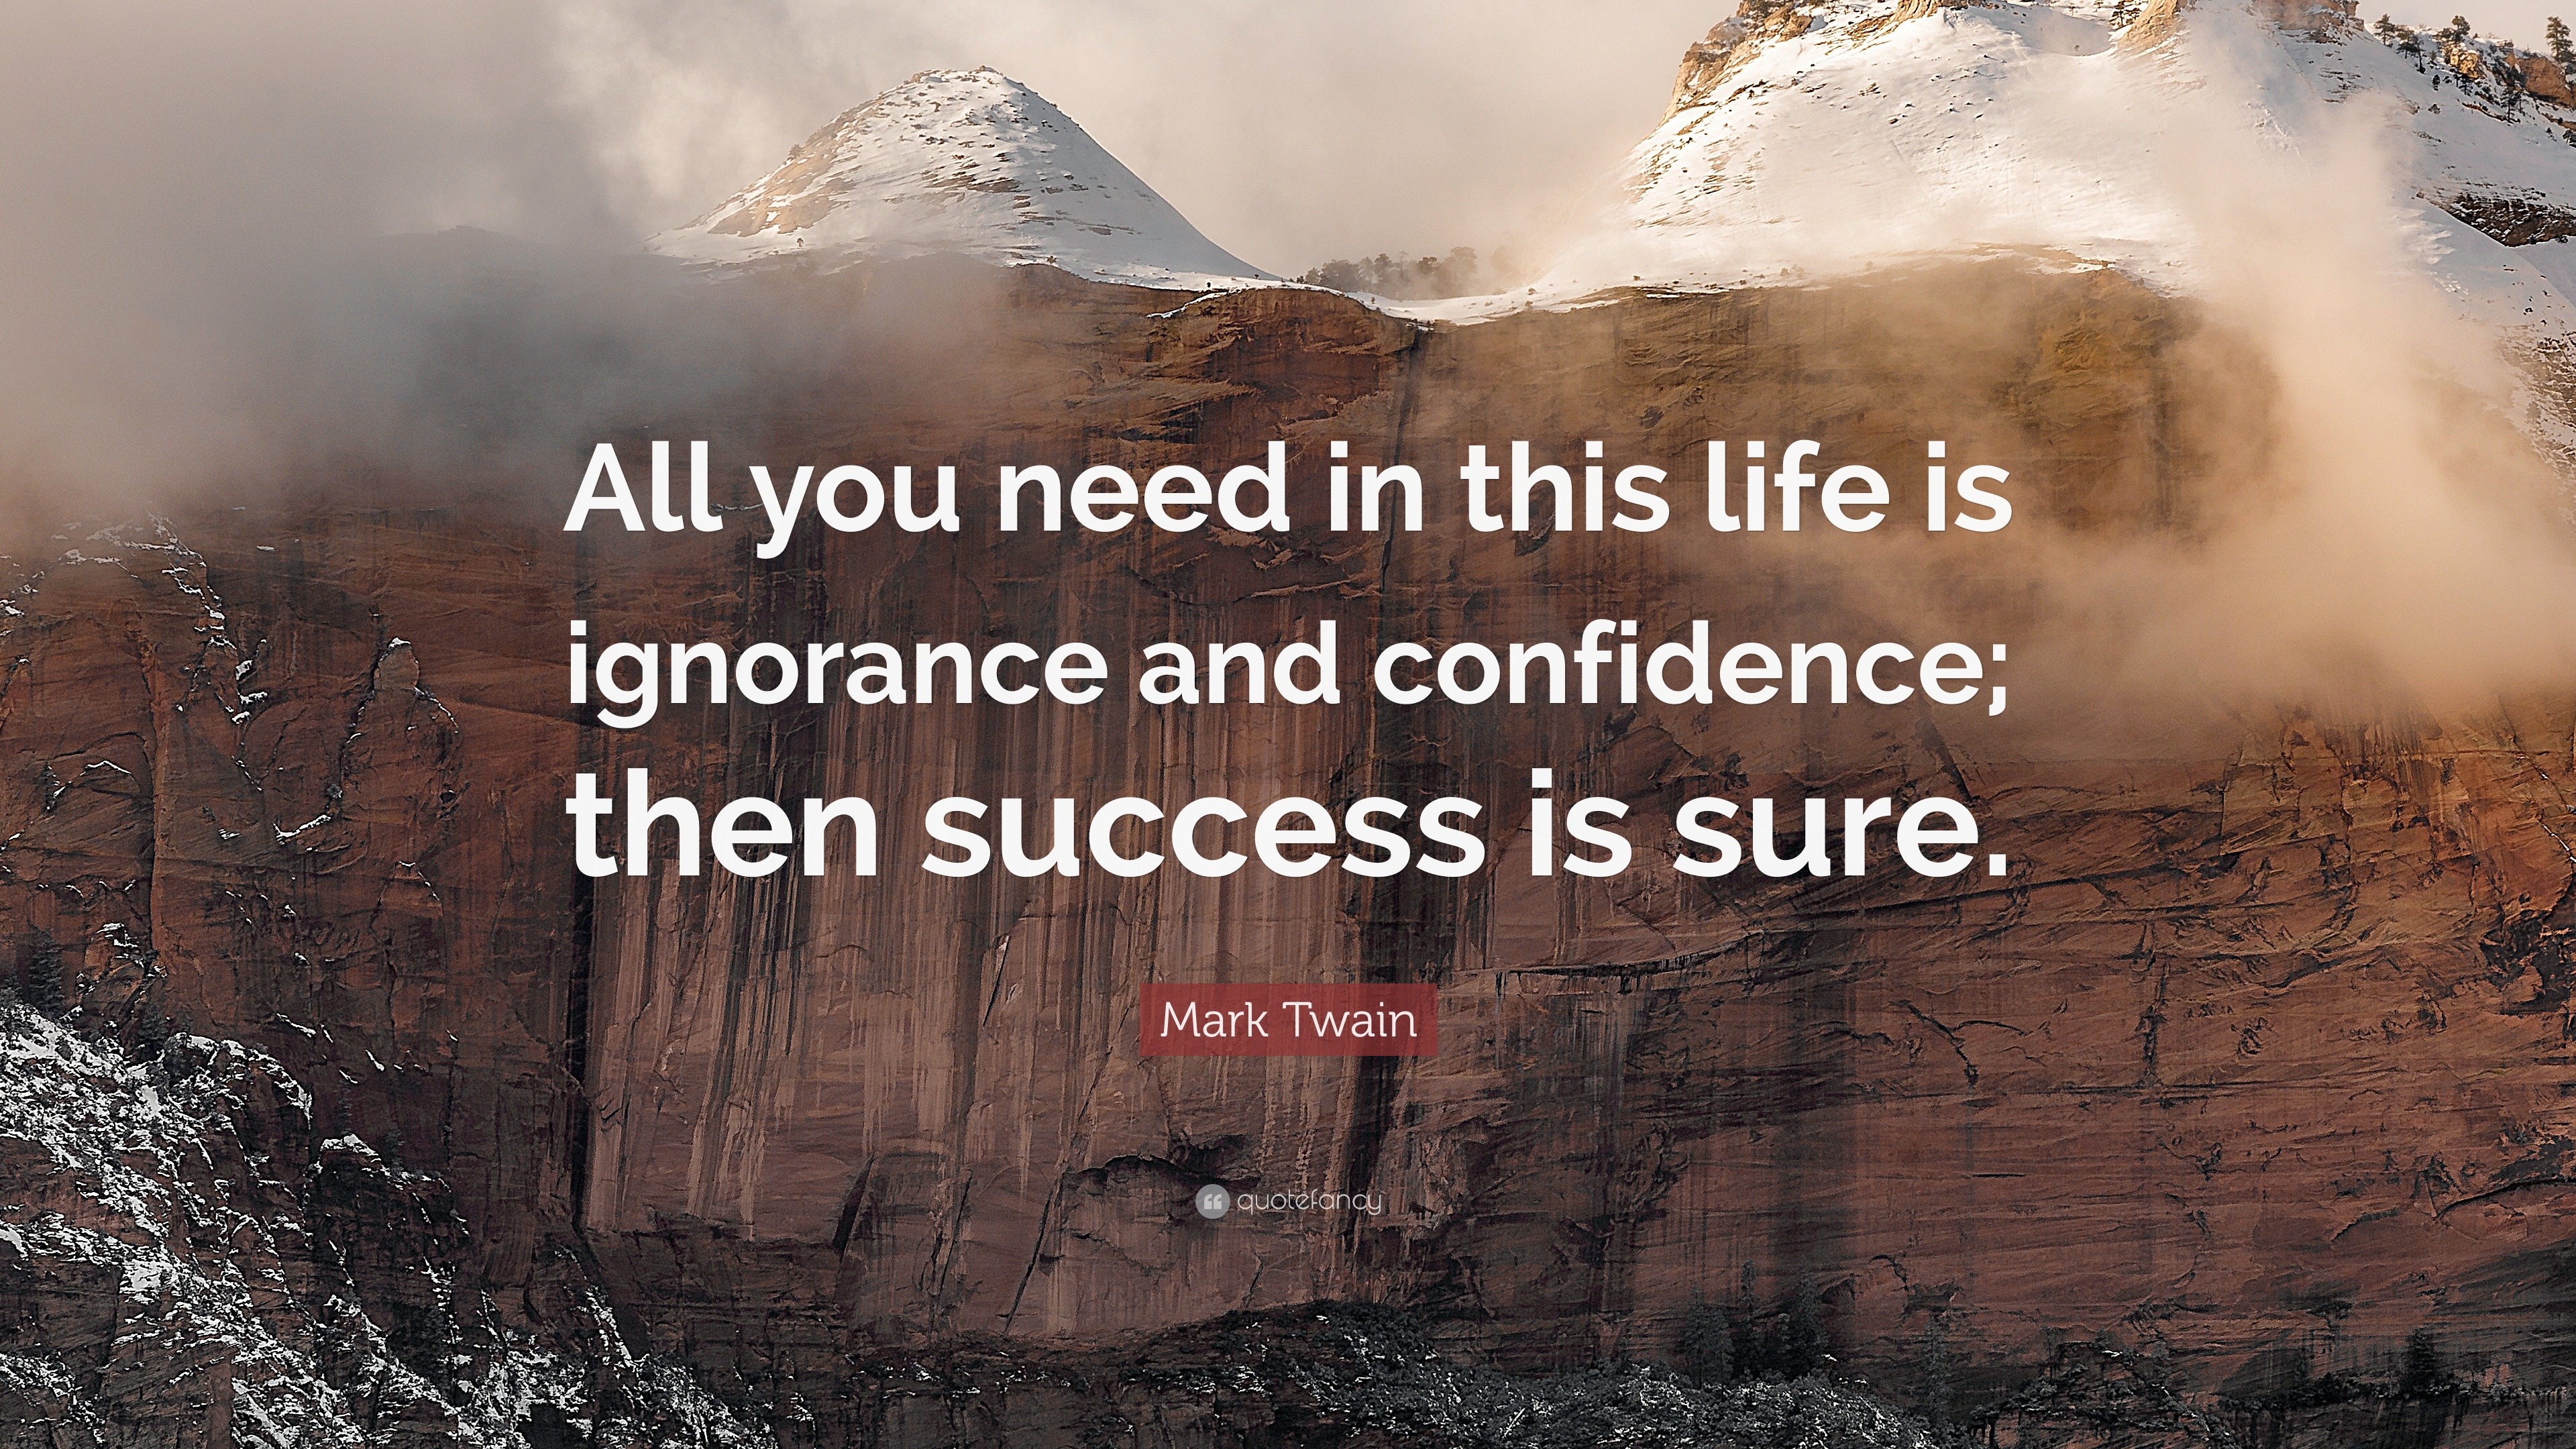 Mark Twain Quote “All you need in this life is ignorance and confidence